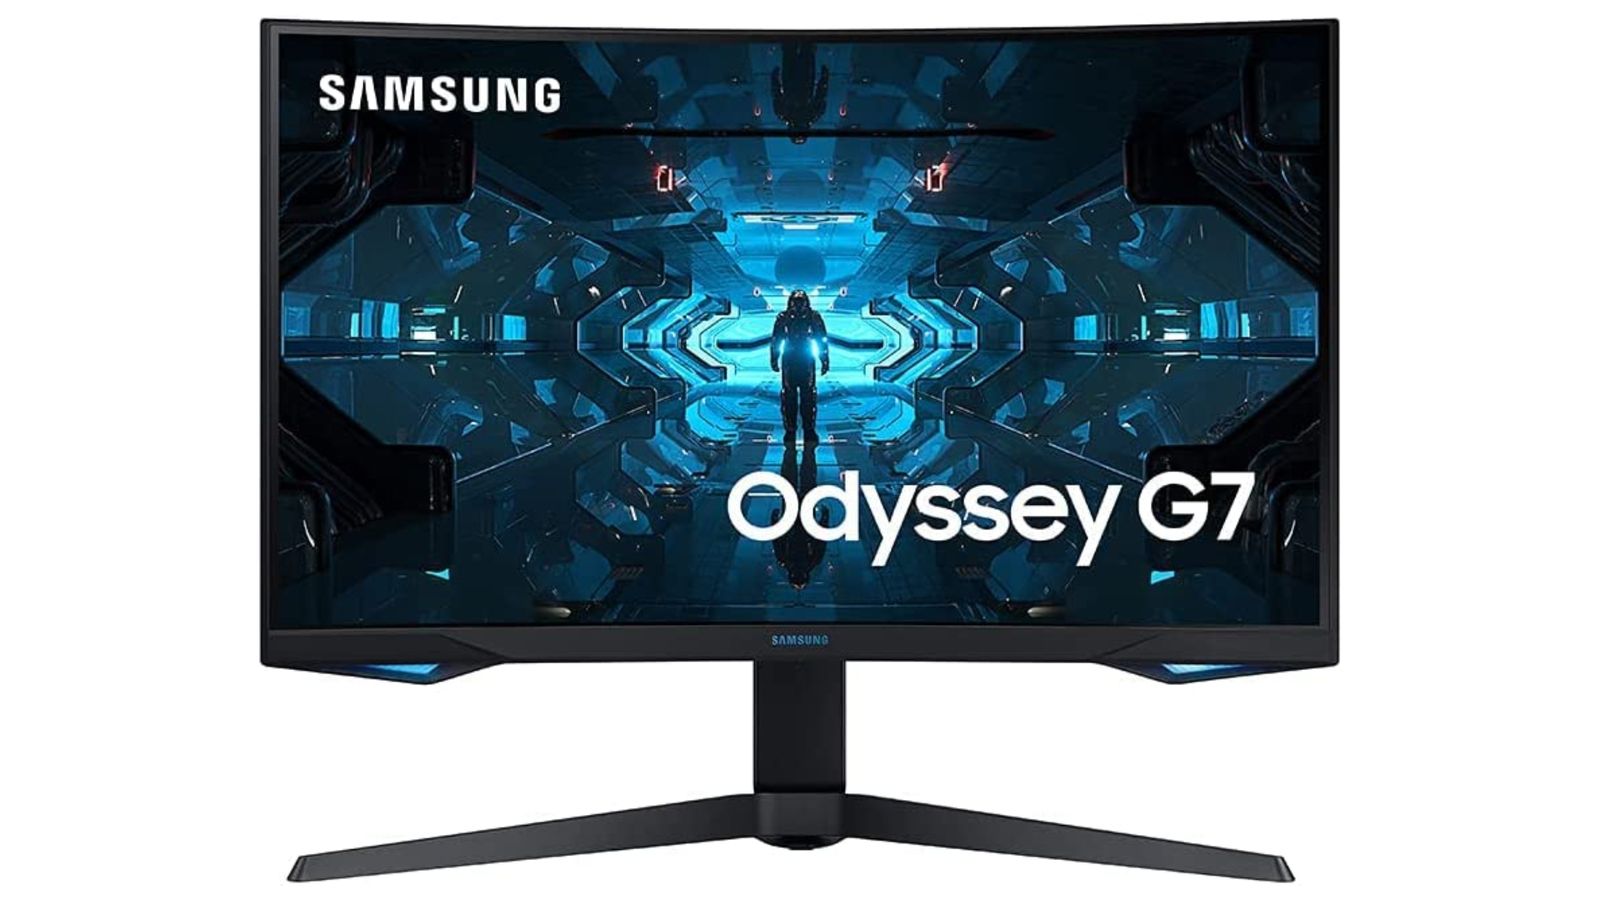 Samsung Odyssey G7 product image of a black monitor featuring a sci-fi walkway bathed in blue lighting on the display.